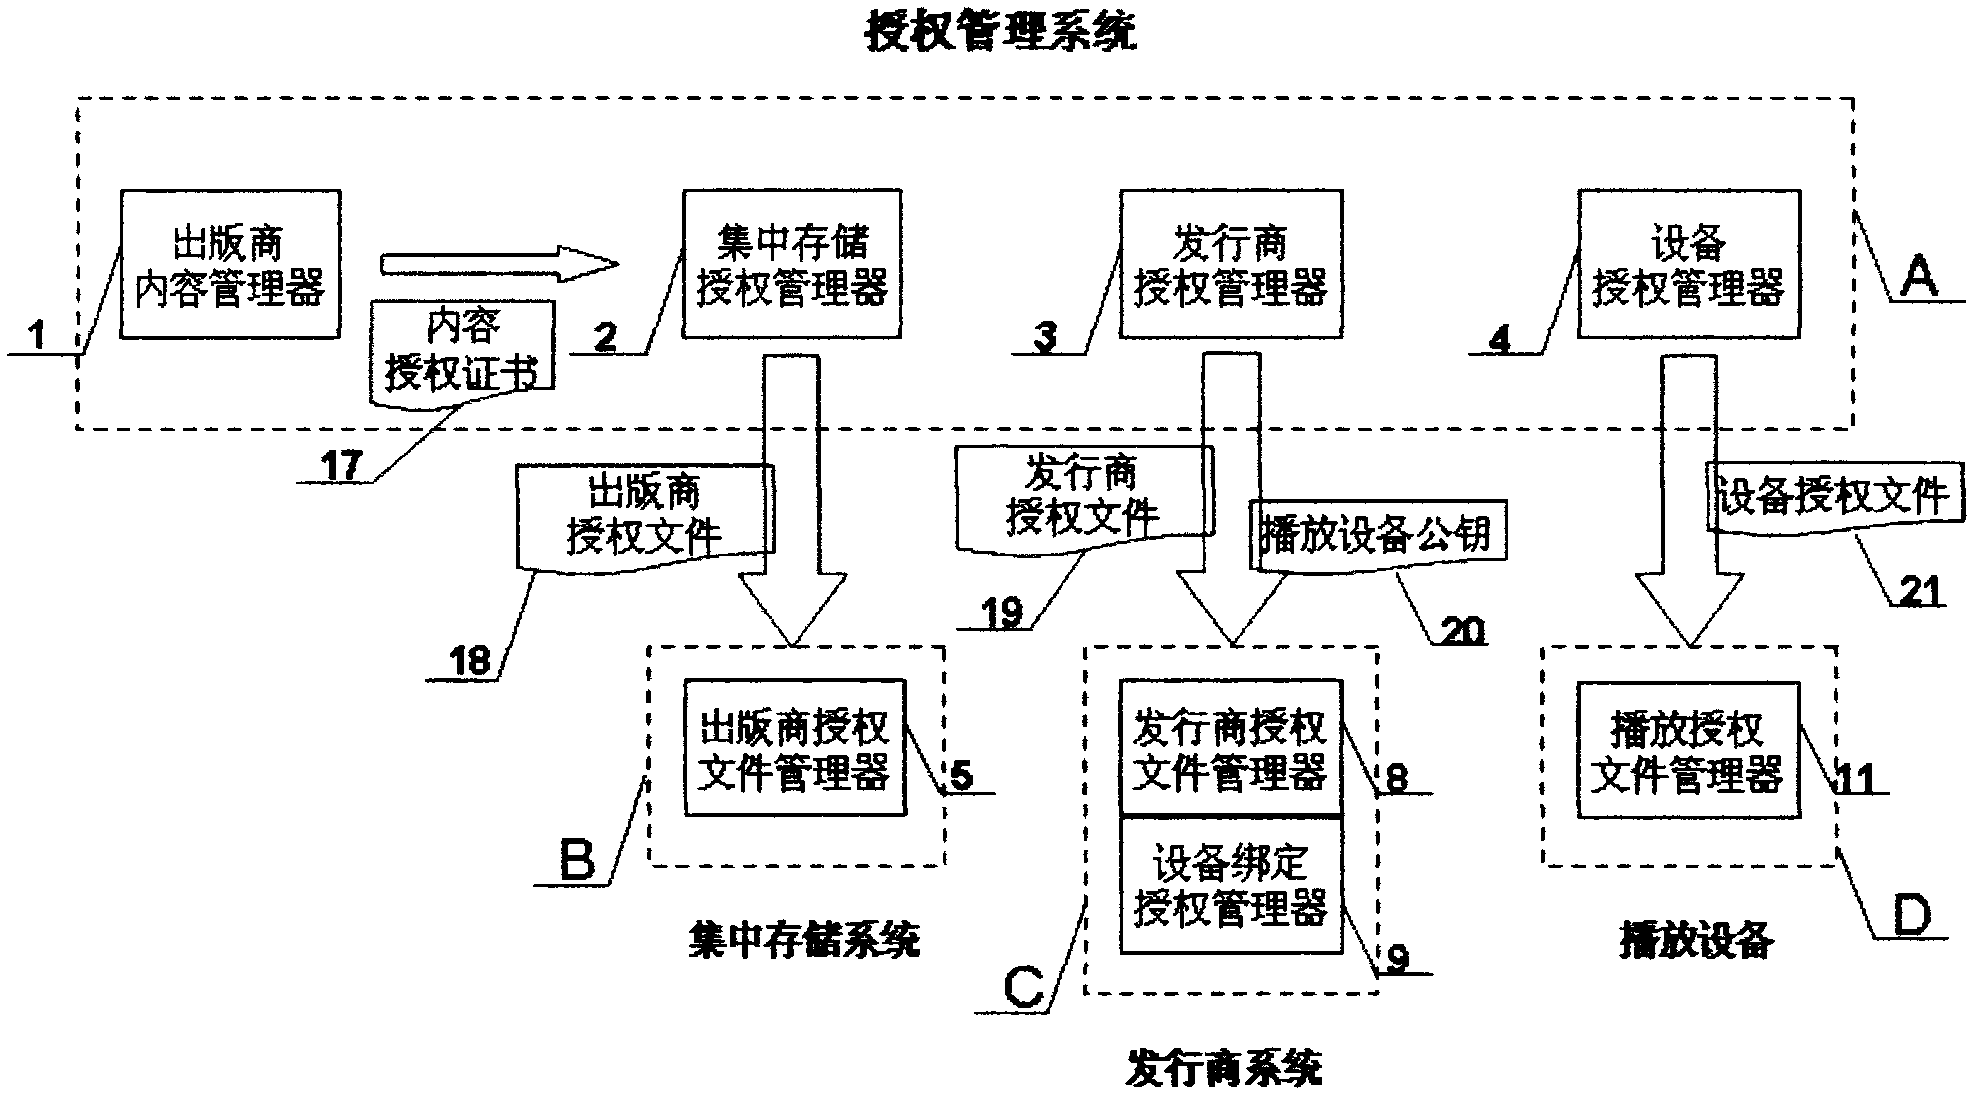 Copyright protecting method and device for publishing digital film and television by reproducible storage equipment